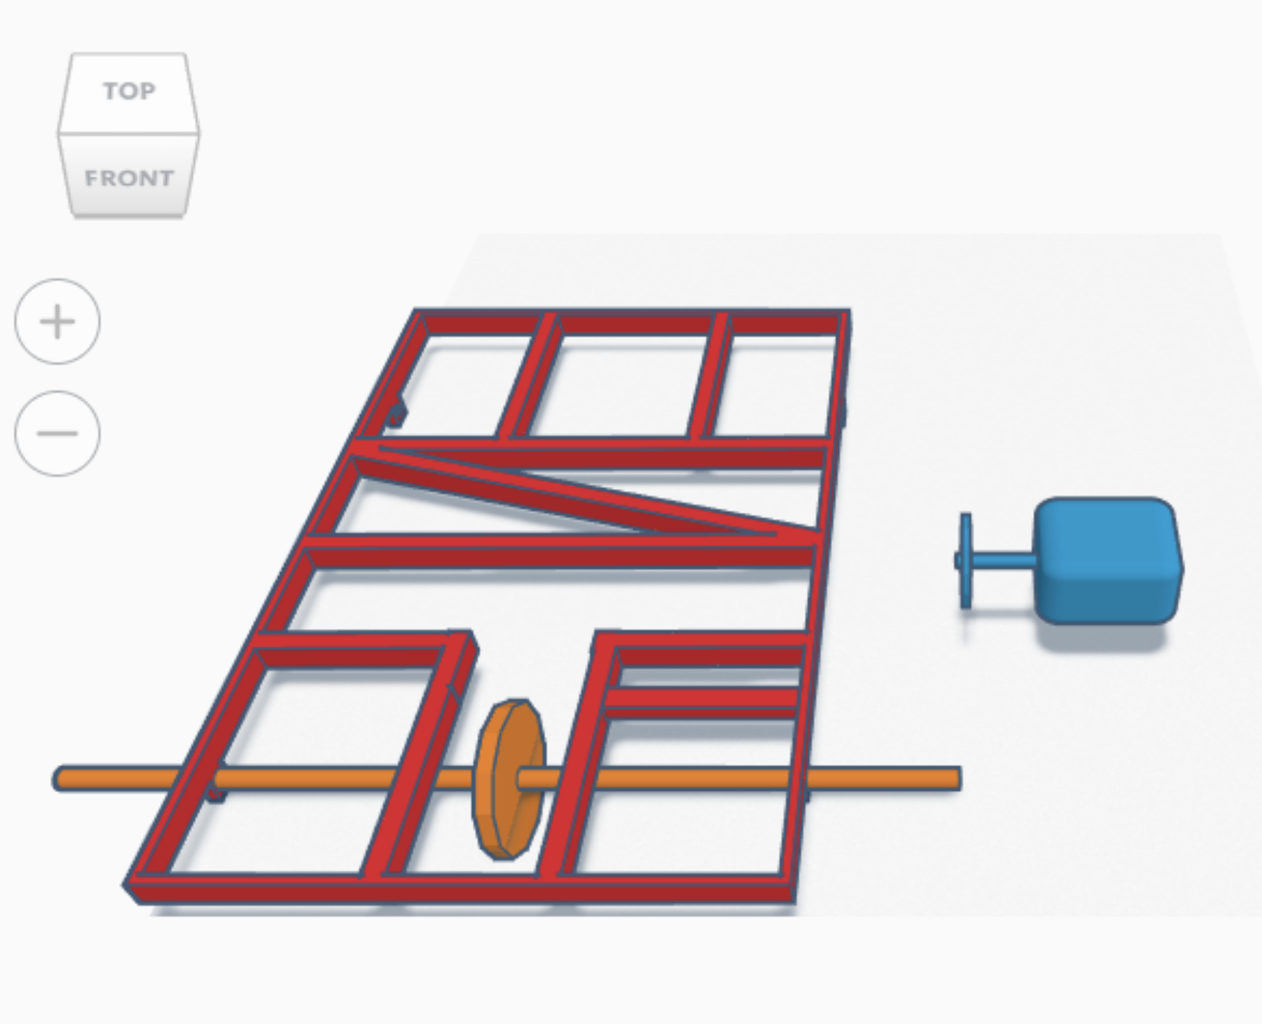 Designing the Car Chassis in Tinkercad